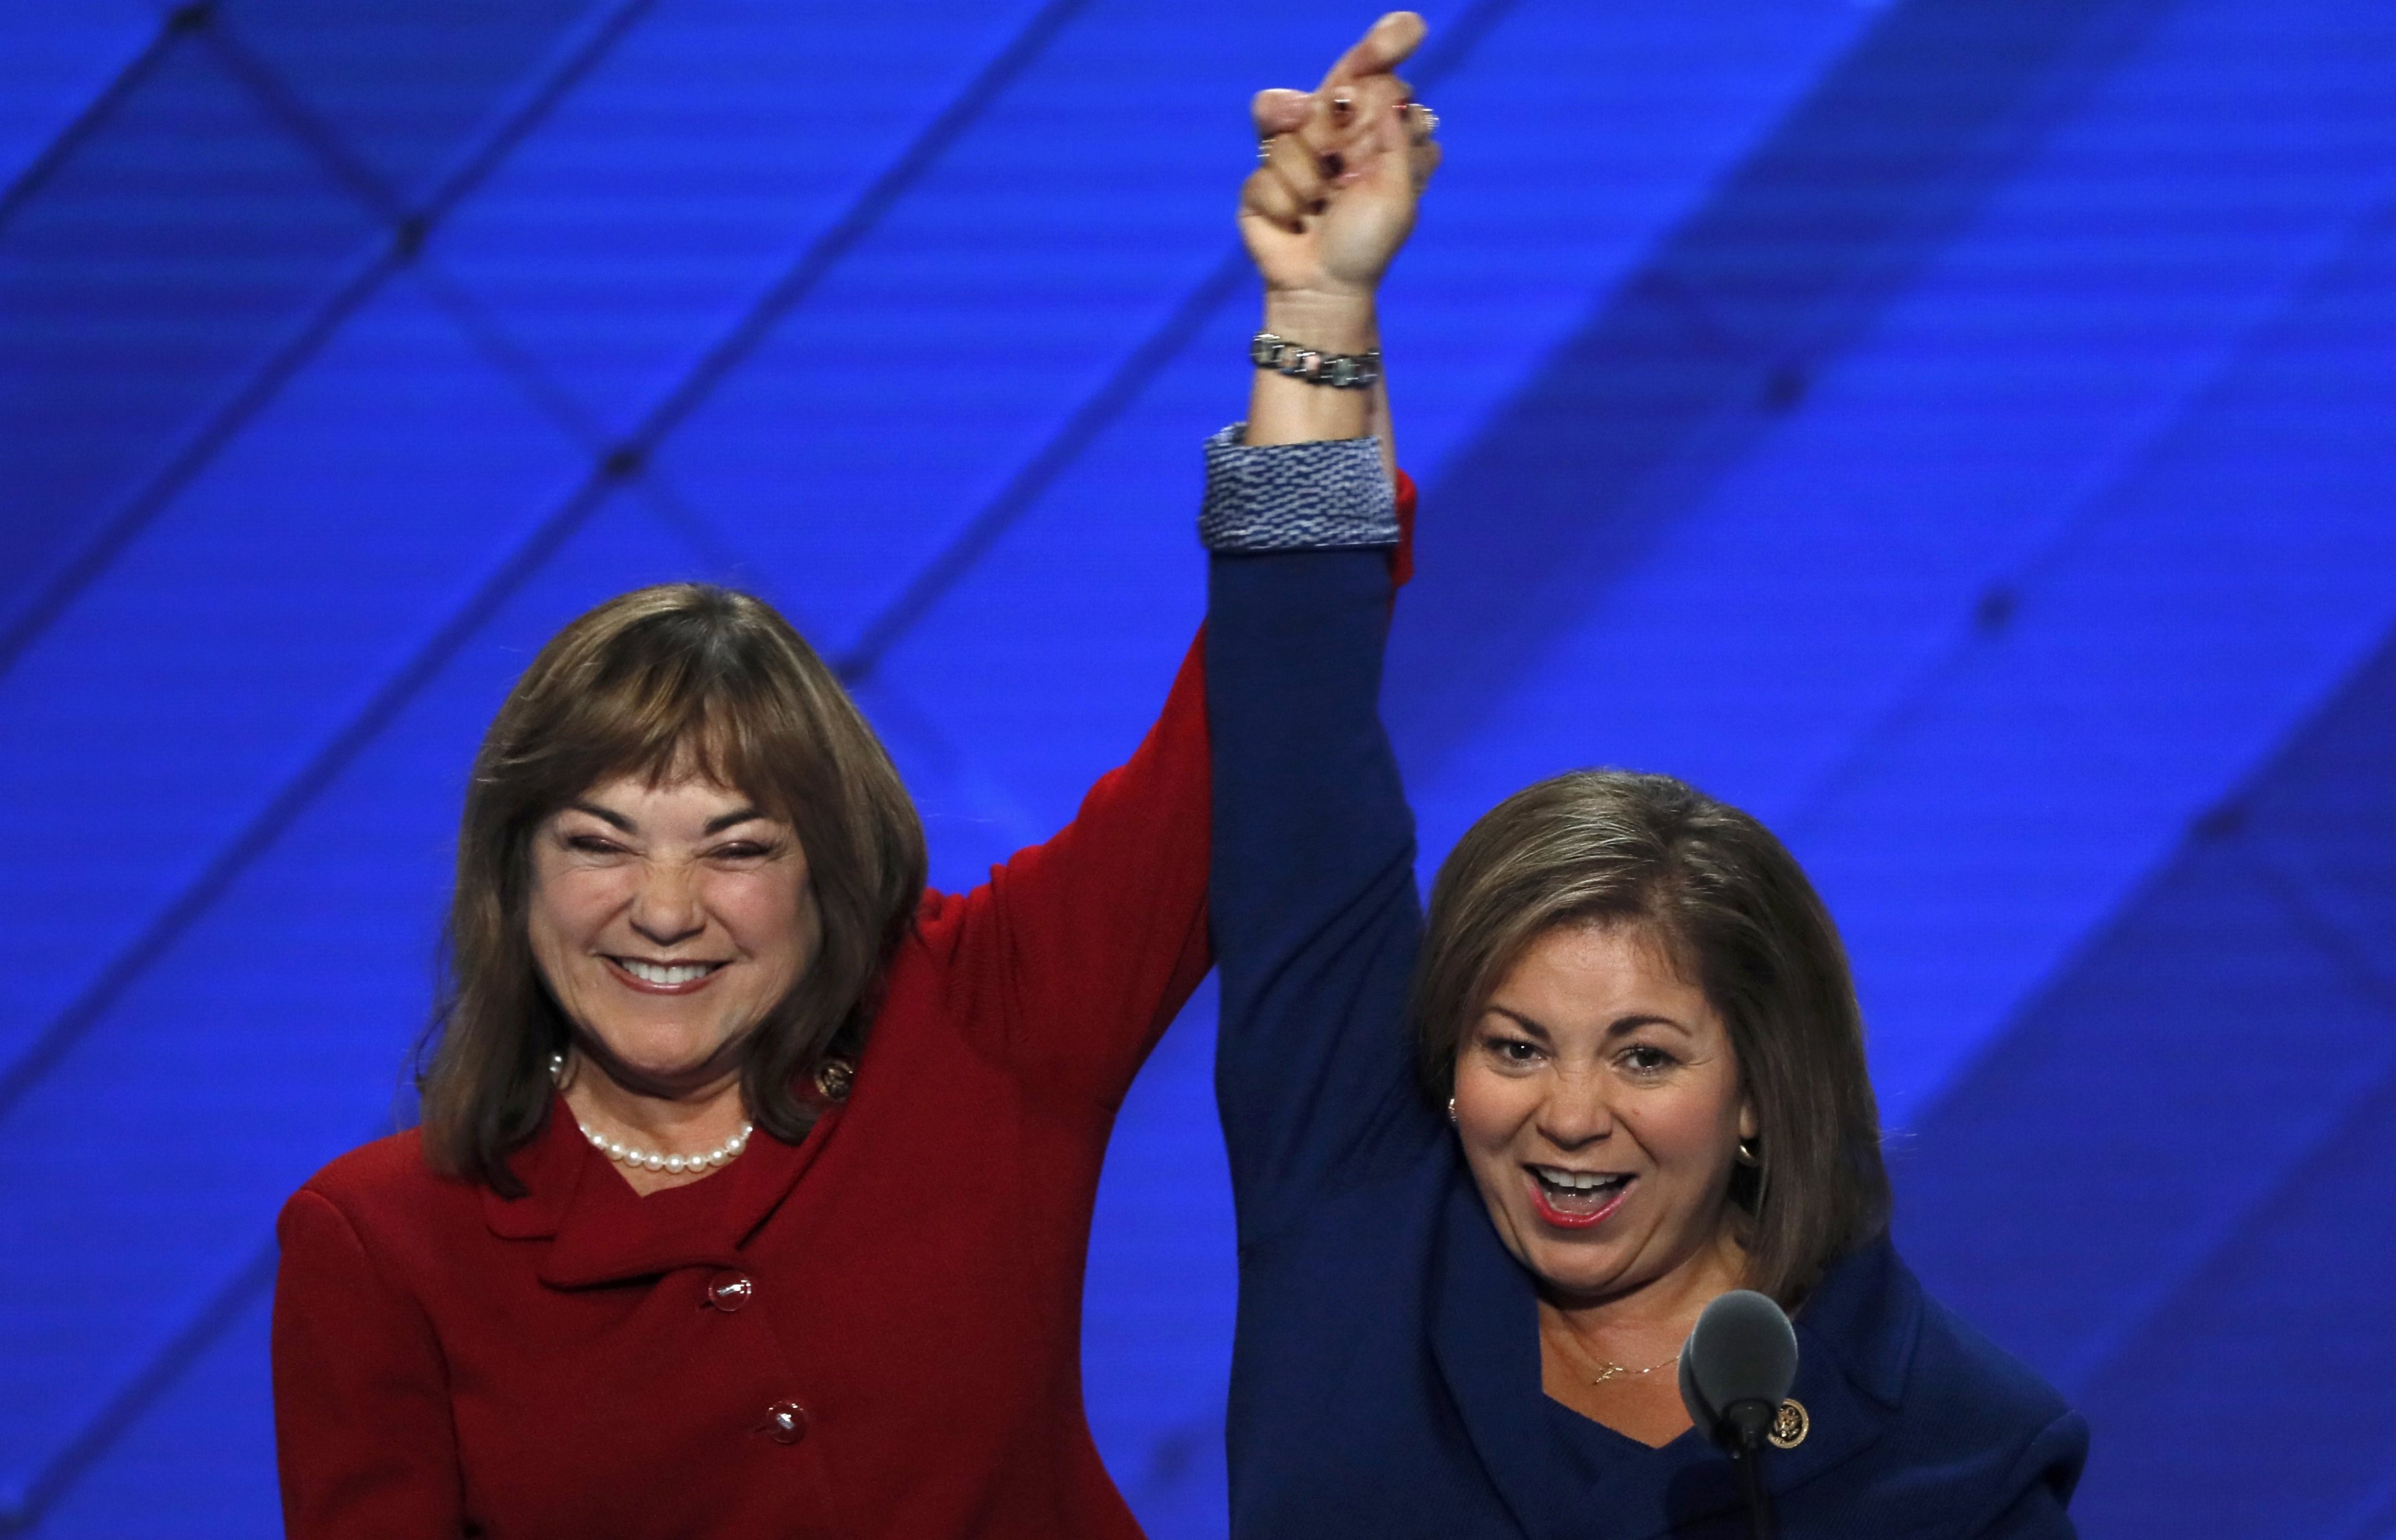 U.S. Rep. Linda Sanchez (D-CA) (R) and her sister and fellow Rep. Loretta join hands onstage at the Democratic National Convention in Philadelphia on July 25, 2016. (Mike Segar—Reuters)